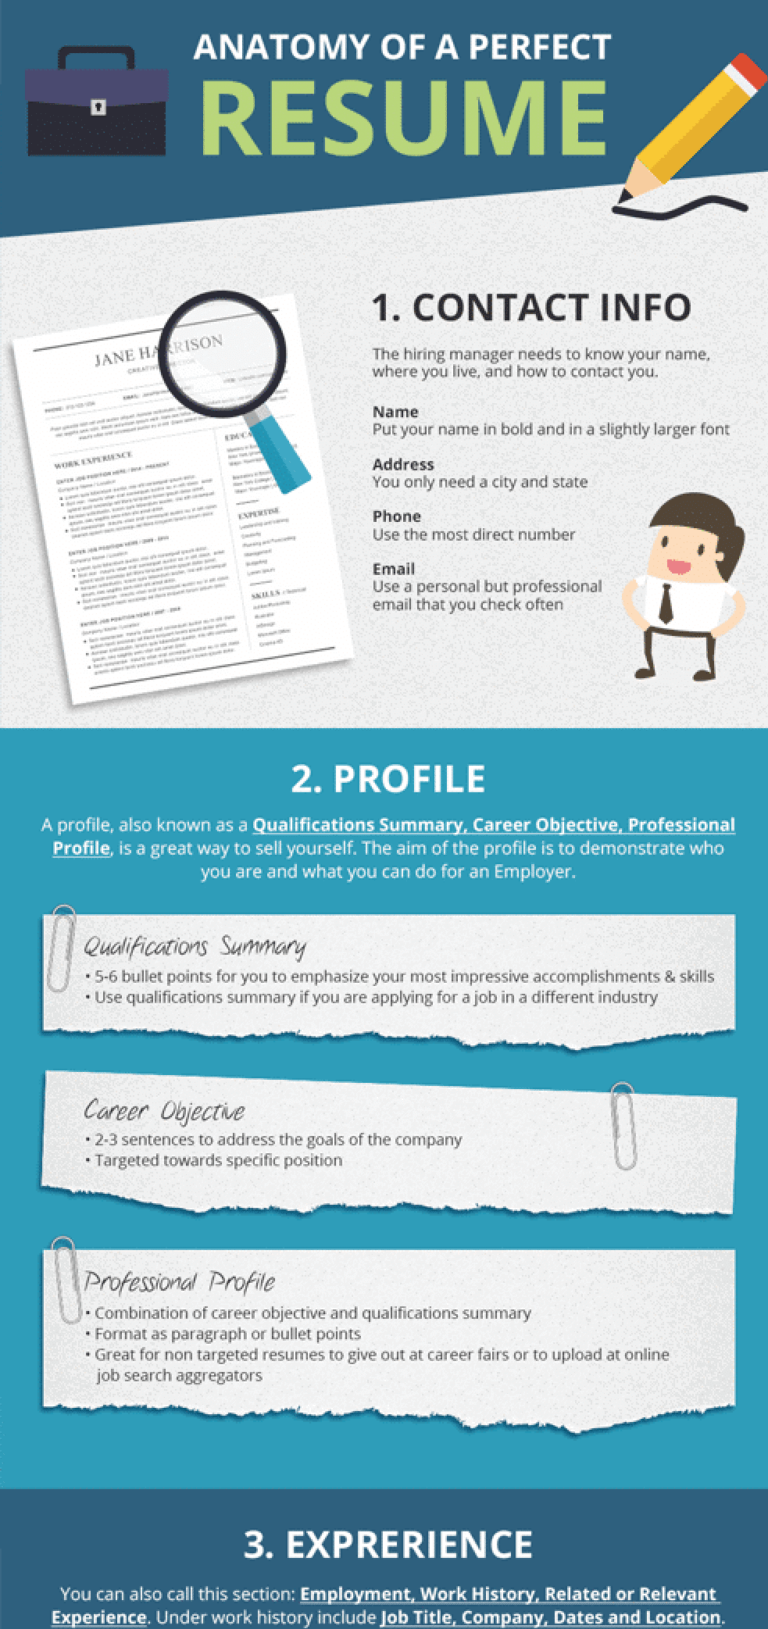 resume-examples-anatomy-of-a-perfect-resume-1